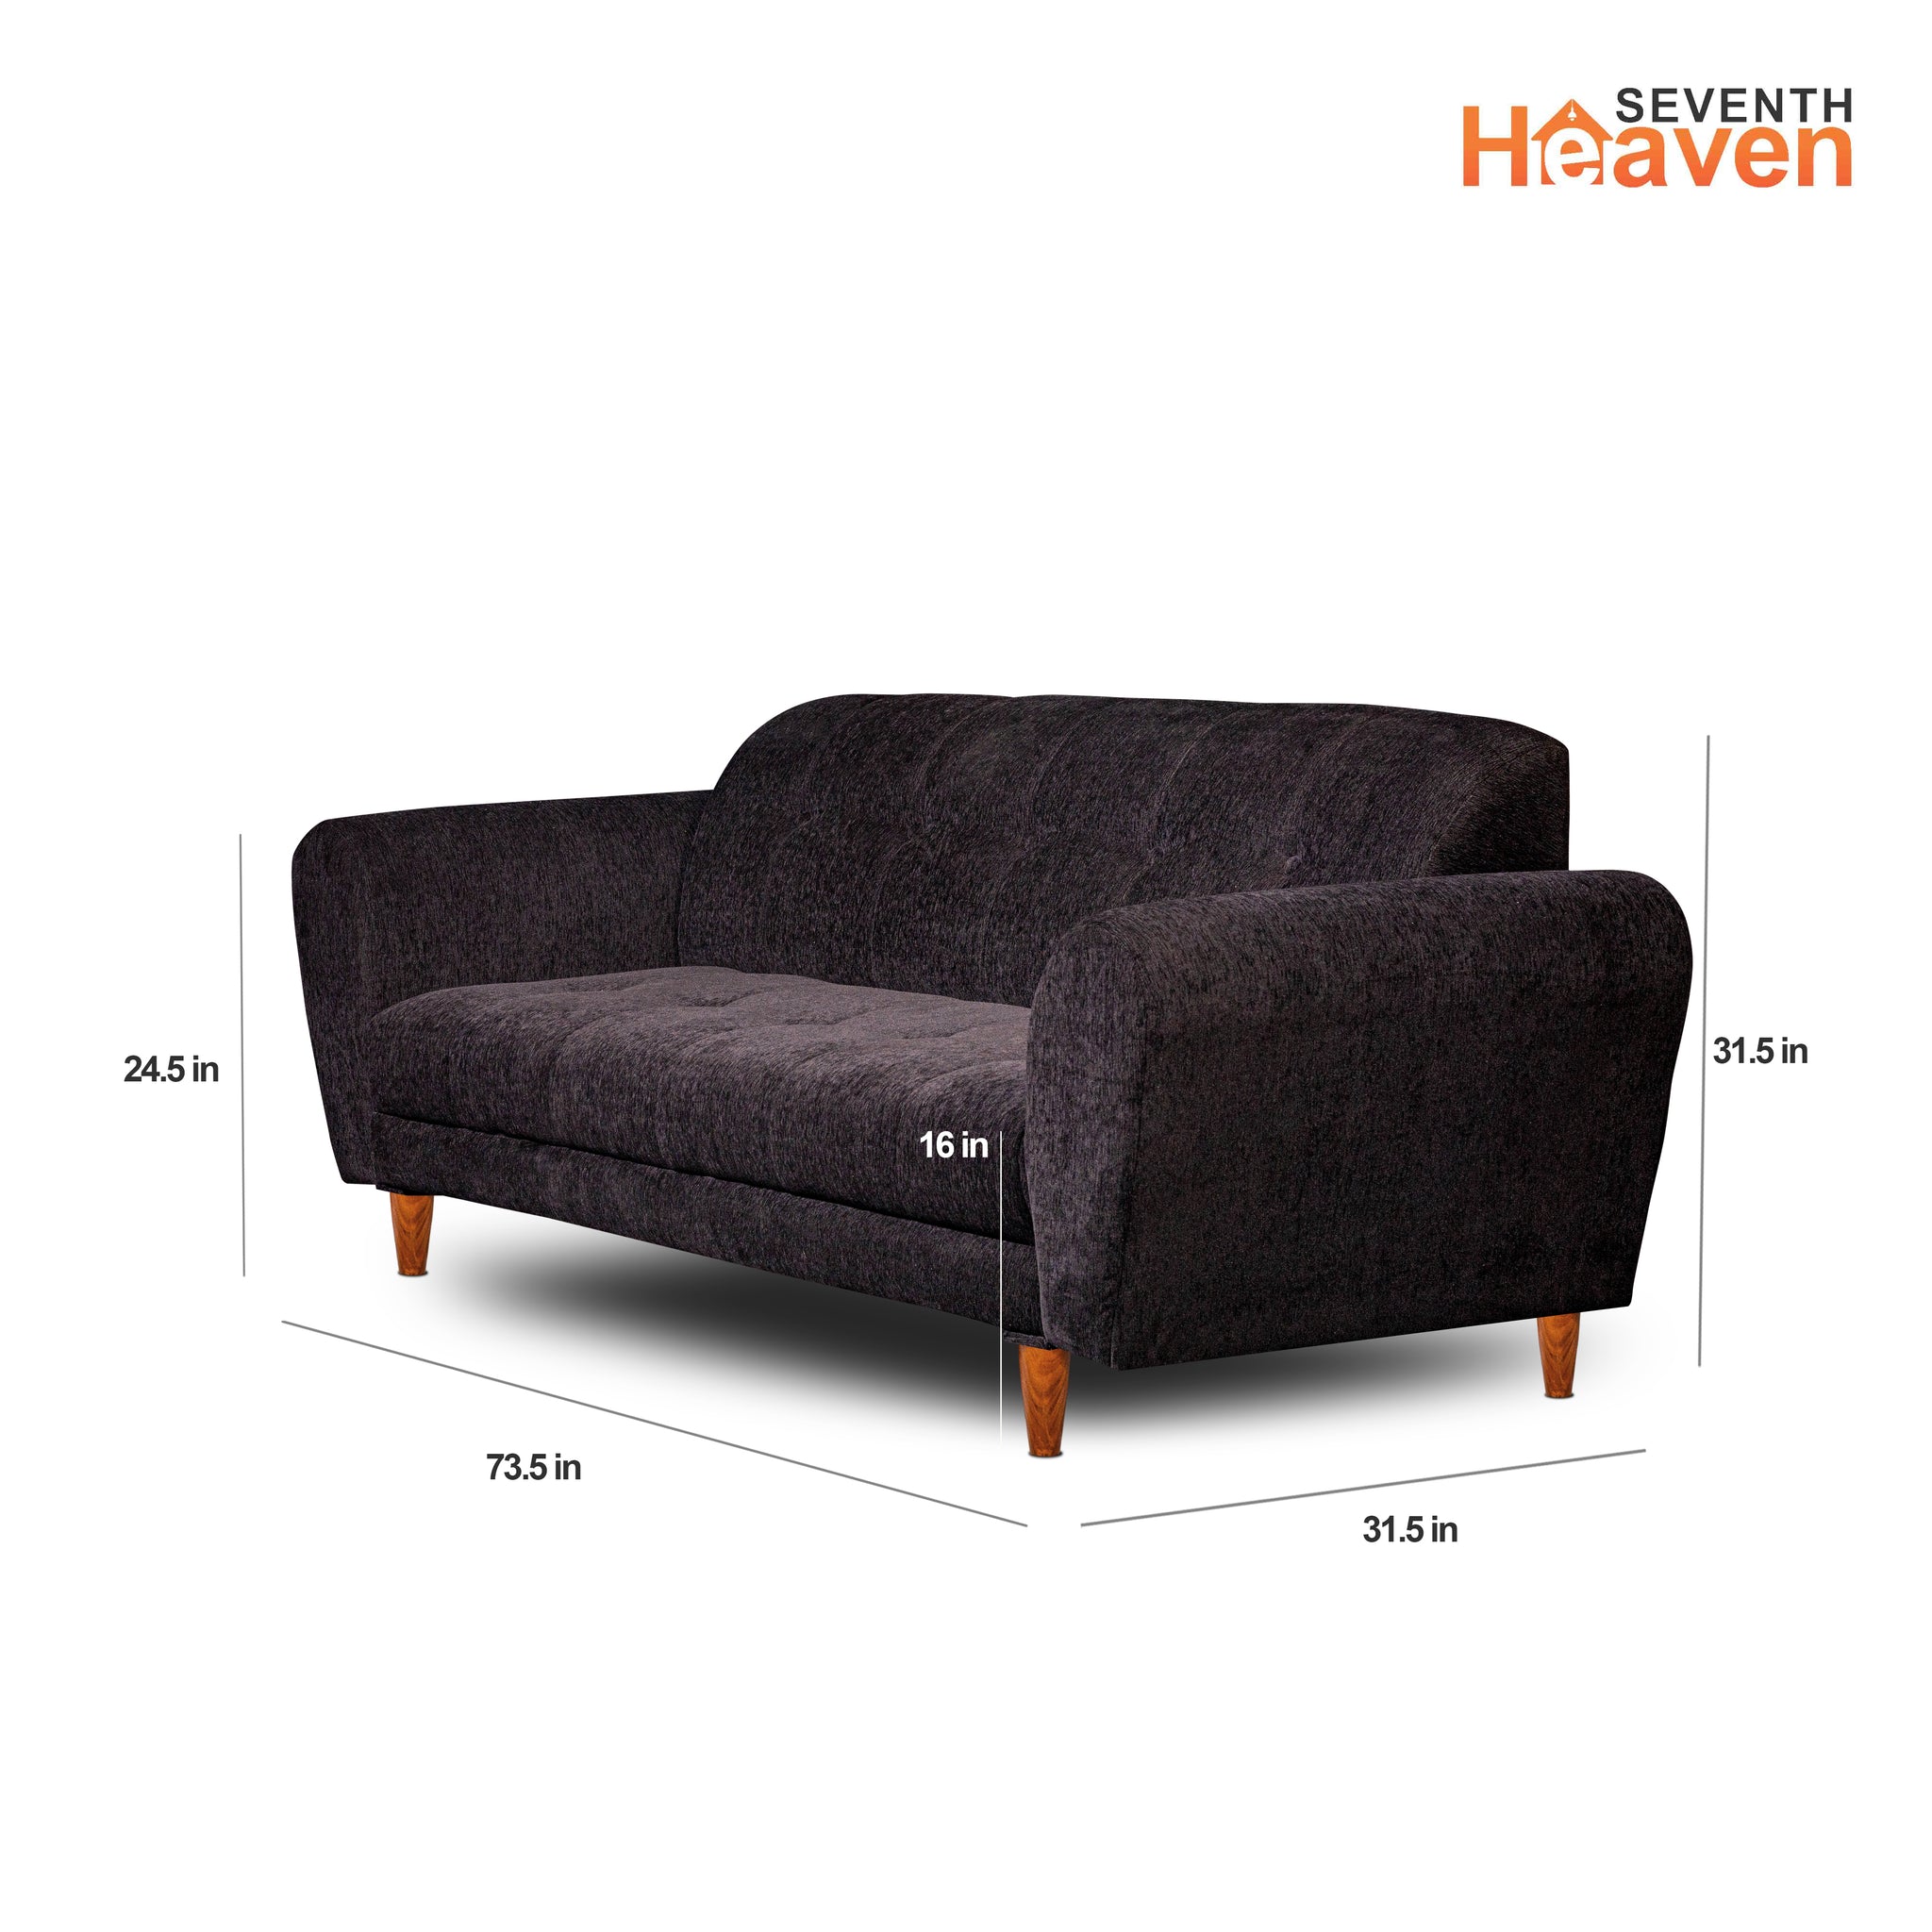 Seventh Heaven Milan 3 Seater Wooden Sofa Set Modern & Elegant Smart Furniture Range for luxurious homes, living rooms and offices. Black Colour Molphino fabric with sheesham polished wooden legs. Product dimensions are also mentioned.